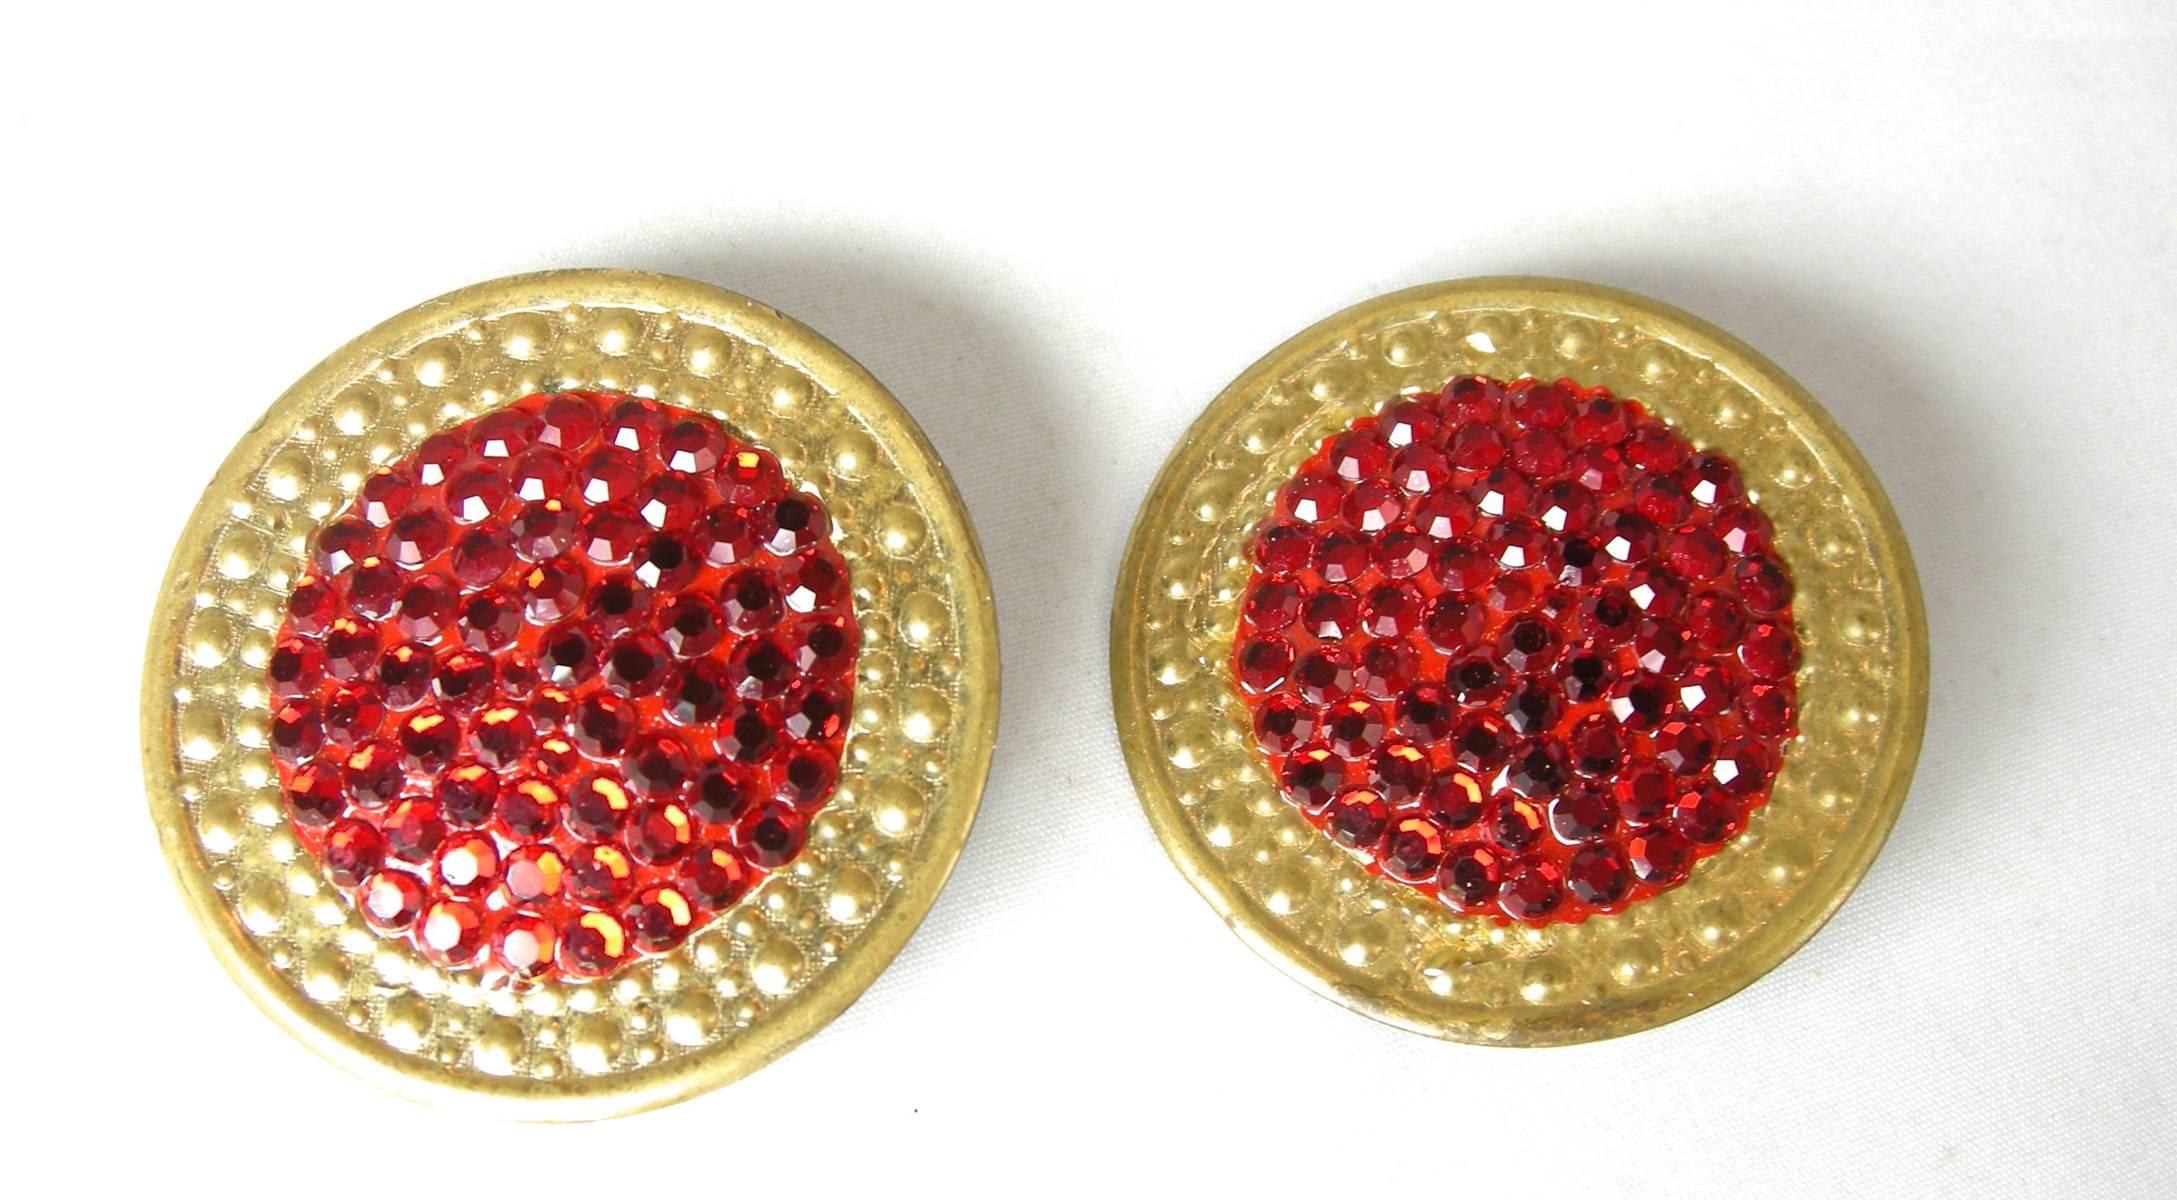 I love Richard Kerr’s jewelry, especially his earrings and this is no exception.  Actually these are perfect for the holidays.  These clip earrings are round with a gold tone design on the outside and the center is filled with vibrant red flat back